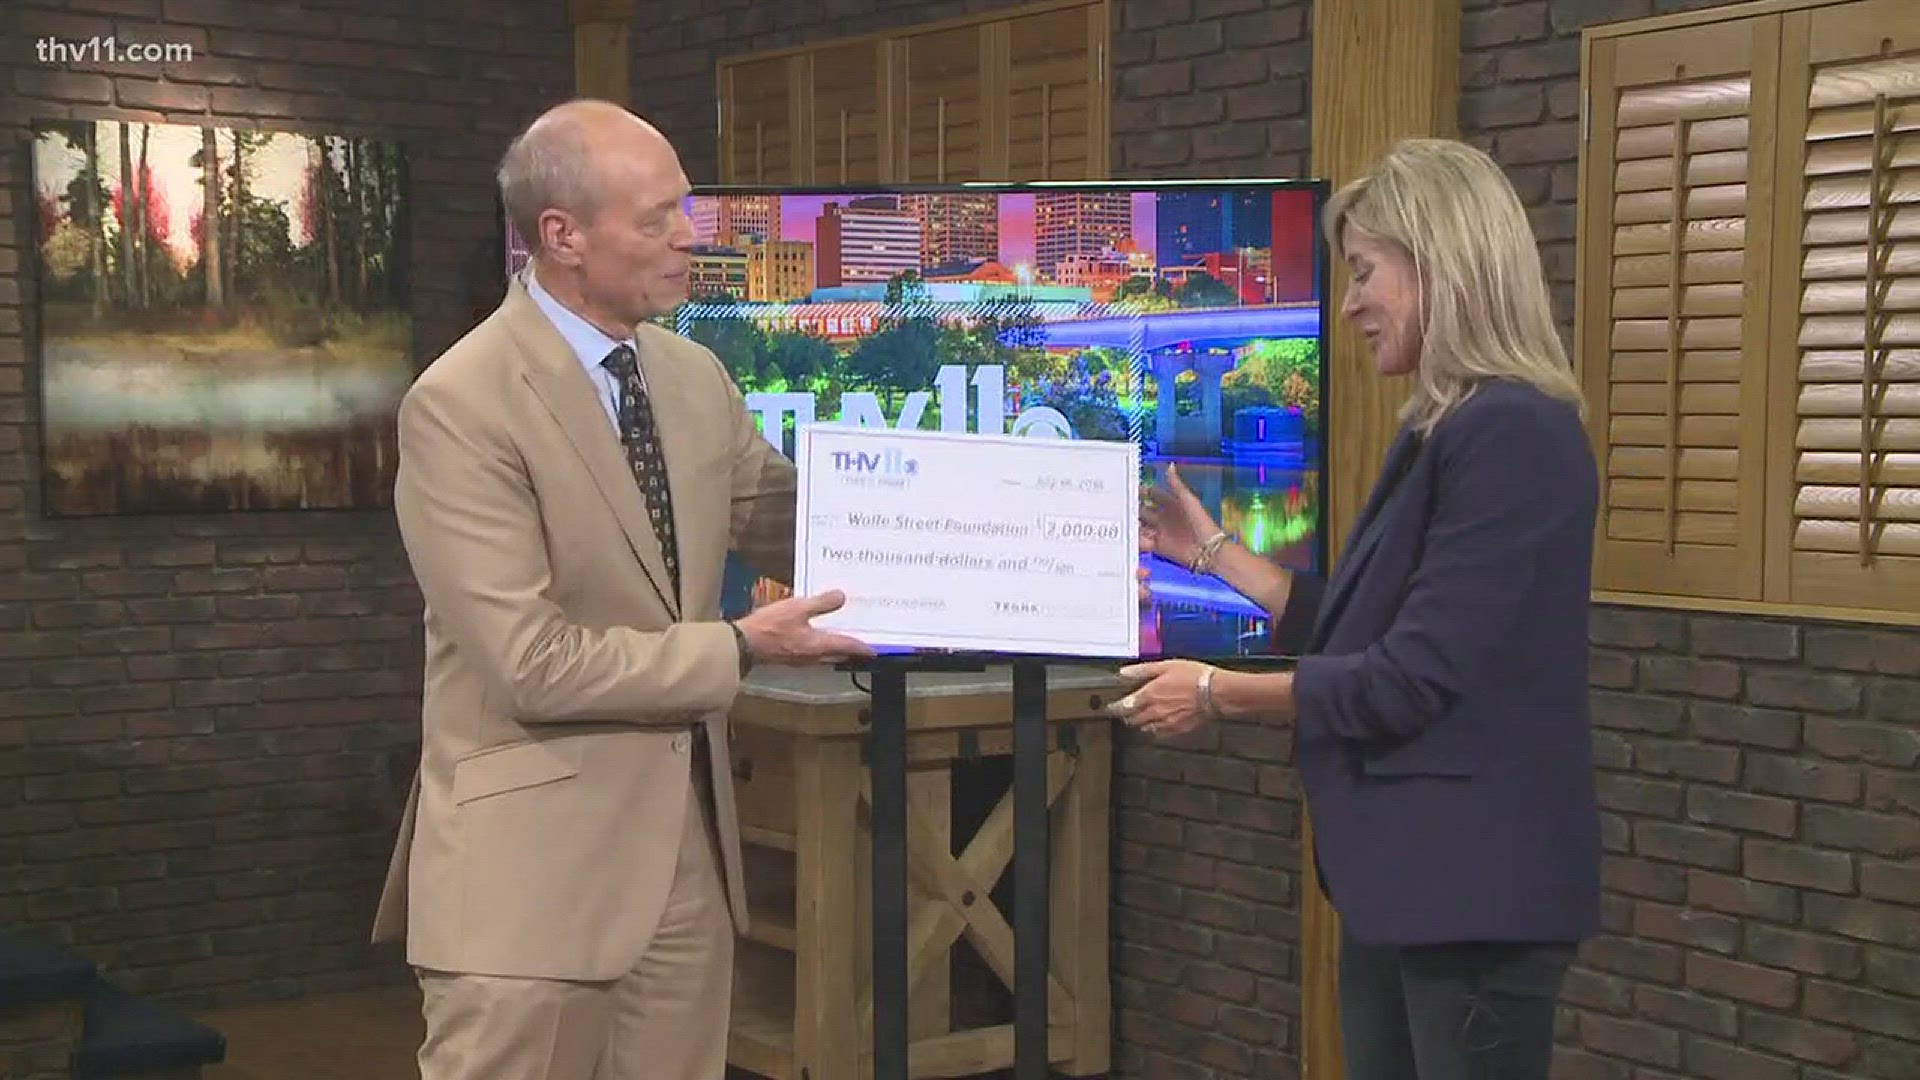 TEGNA donates $2,000 to the foundation, which is celebrating 35 years of helping people recover from addiction.